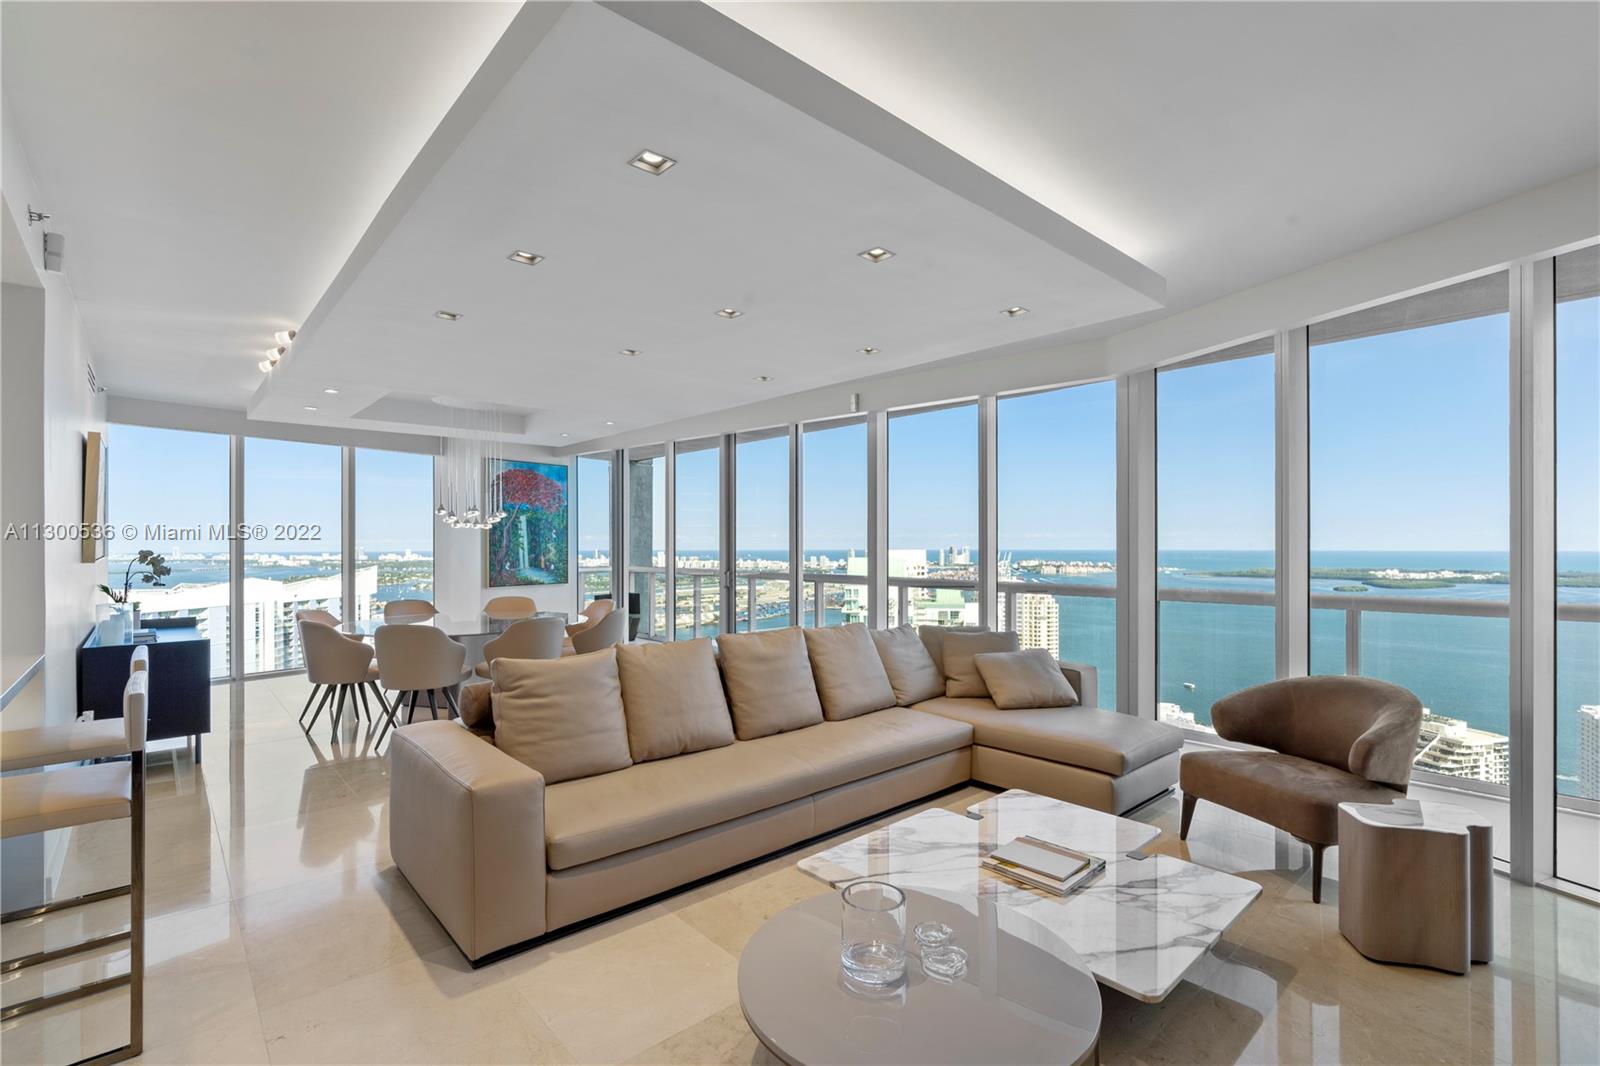 If you want to live as high as helicopters, this would be your dream apartment. Completely renovated, 3 beds and 2.5 bath. Corner unit in the hip and luxurious Icon Brickell. The line 01 in Tower 1, offers the largest and most desirable layout with gorgeous water views, Italian cabinets, closets, doors and wood walls. Located in the heart of Brickell, close to the parks, restaurants, shopping centers and more.
Best Amenities inside the Building.